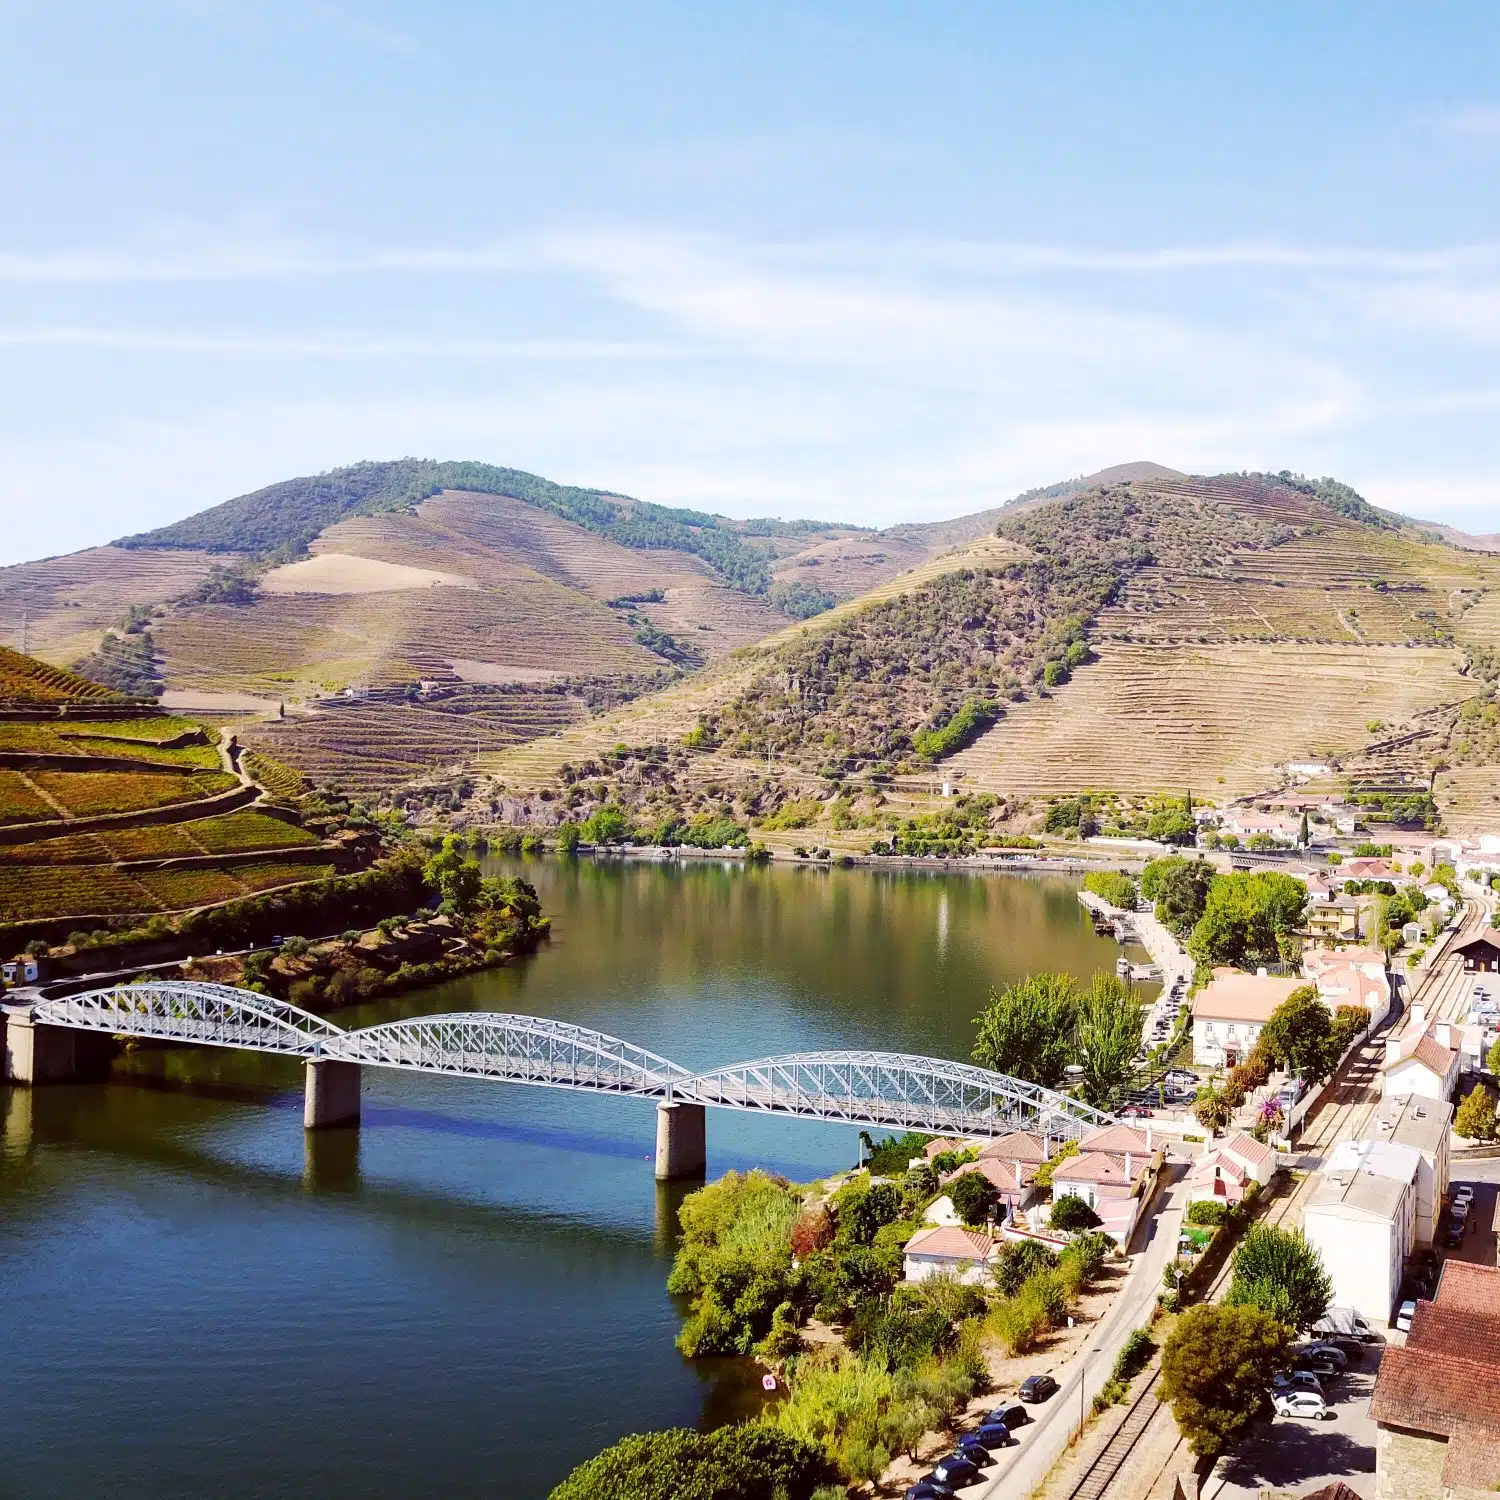 The Douro Valley, Portugal